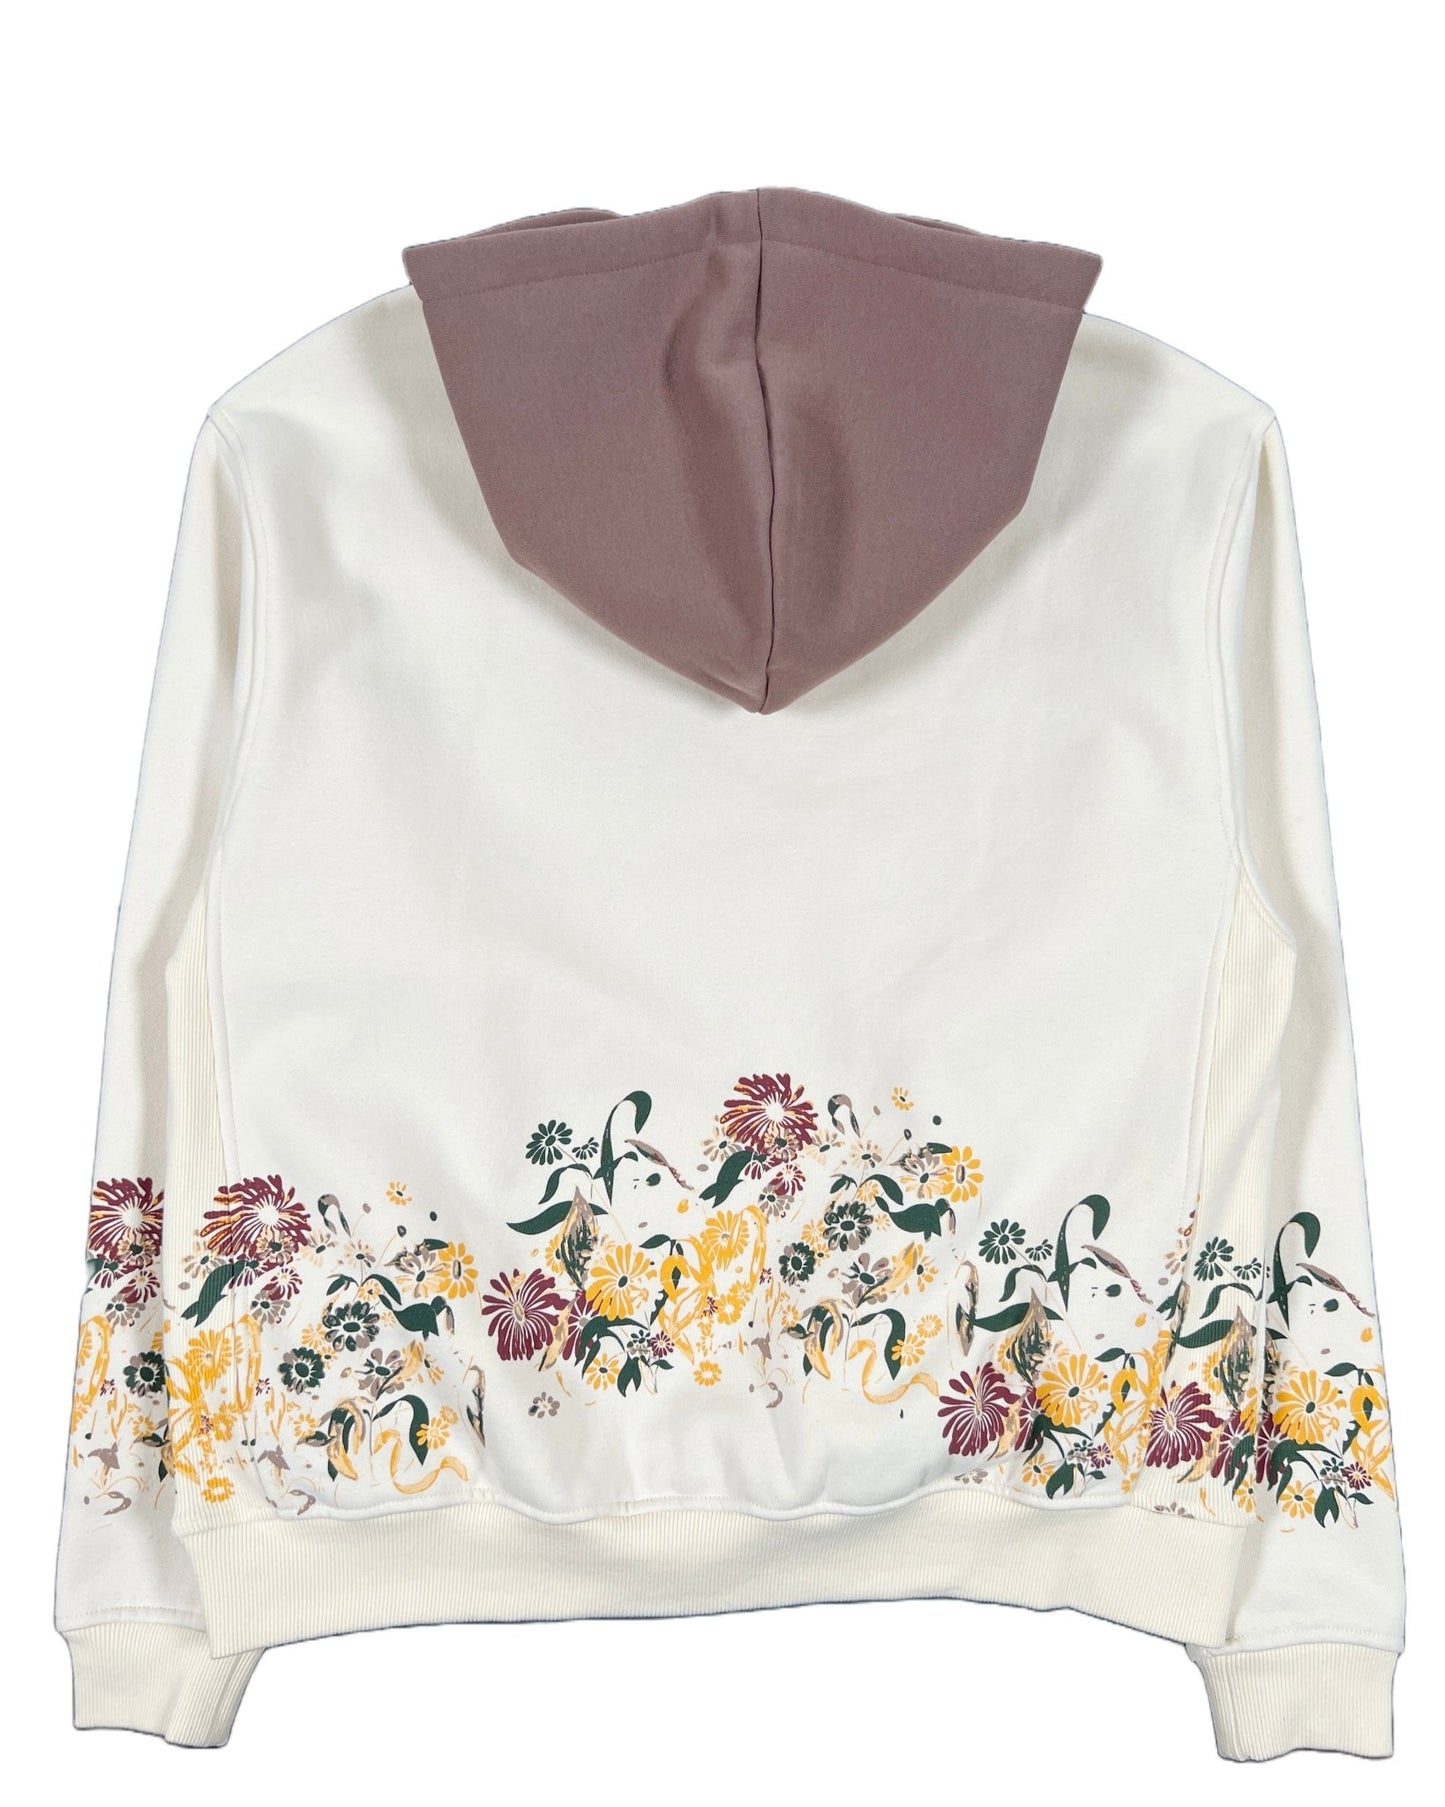 Probus YESTERDAY IS DEAD BOTANICAL PULLOVER CREAM S